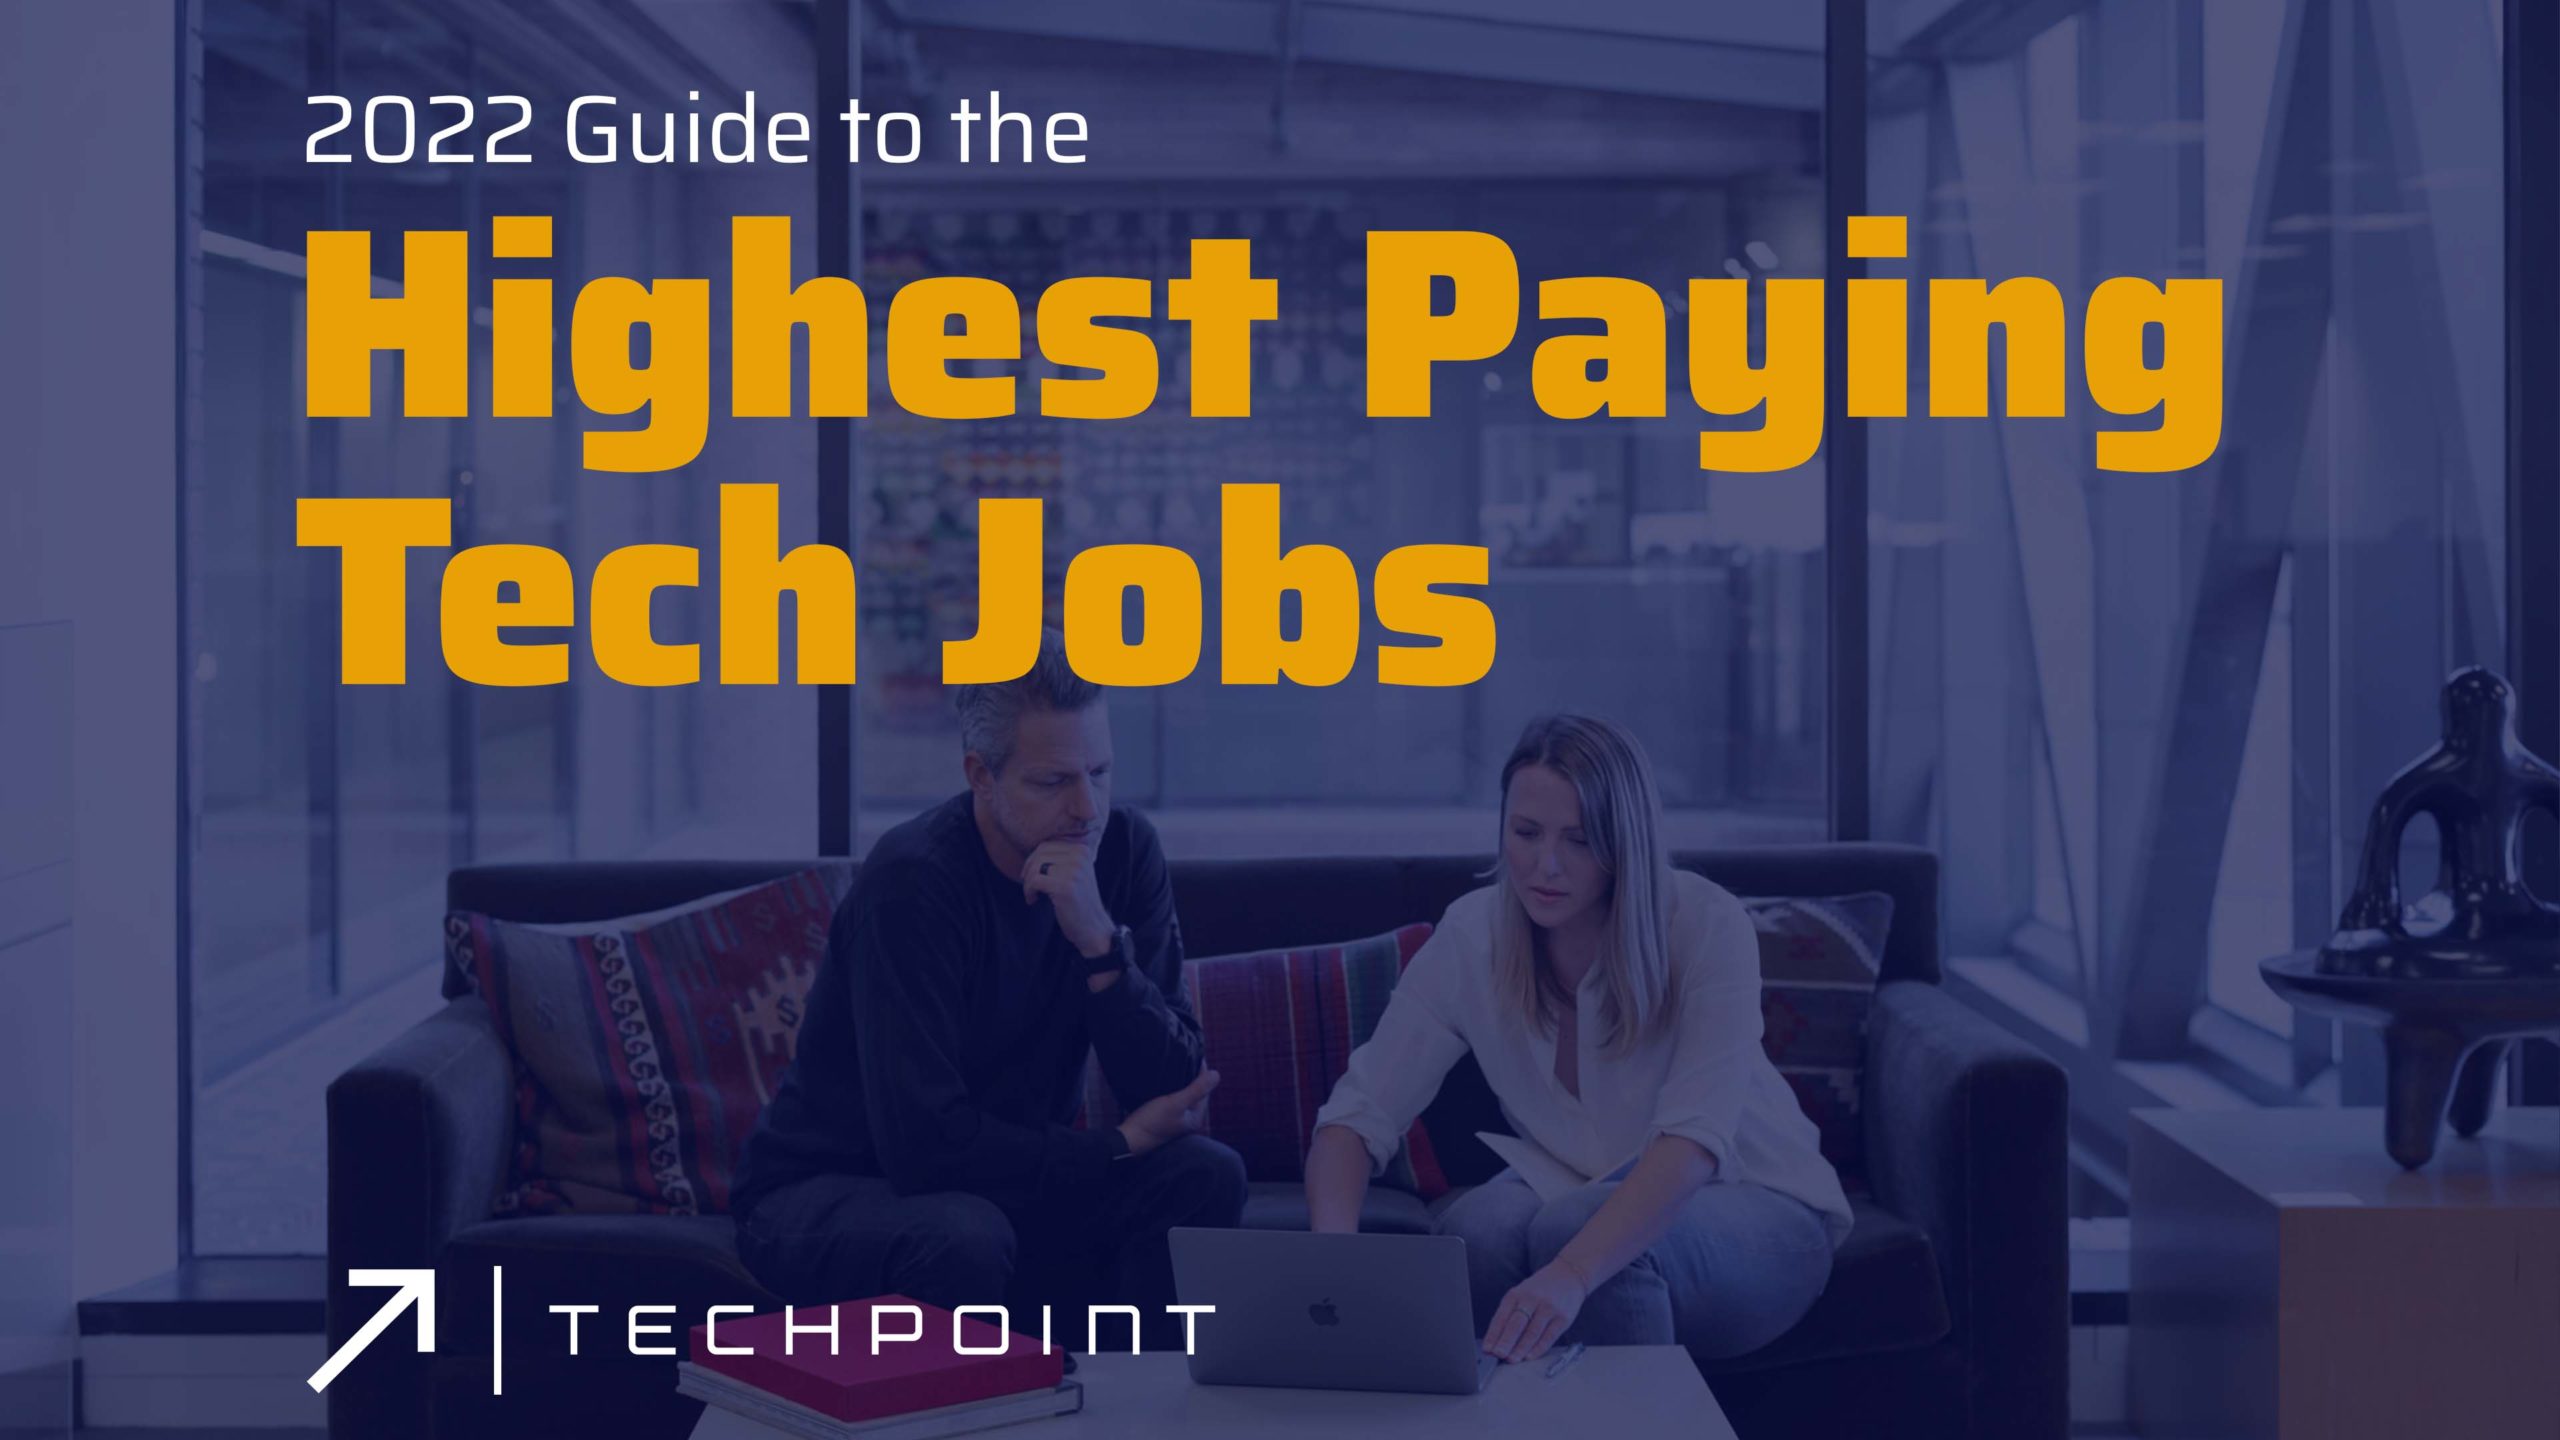 2022 Guide to the Highest Paying Tech Jobs TechPoint